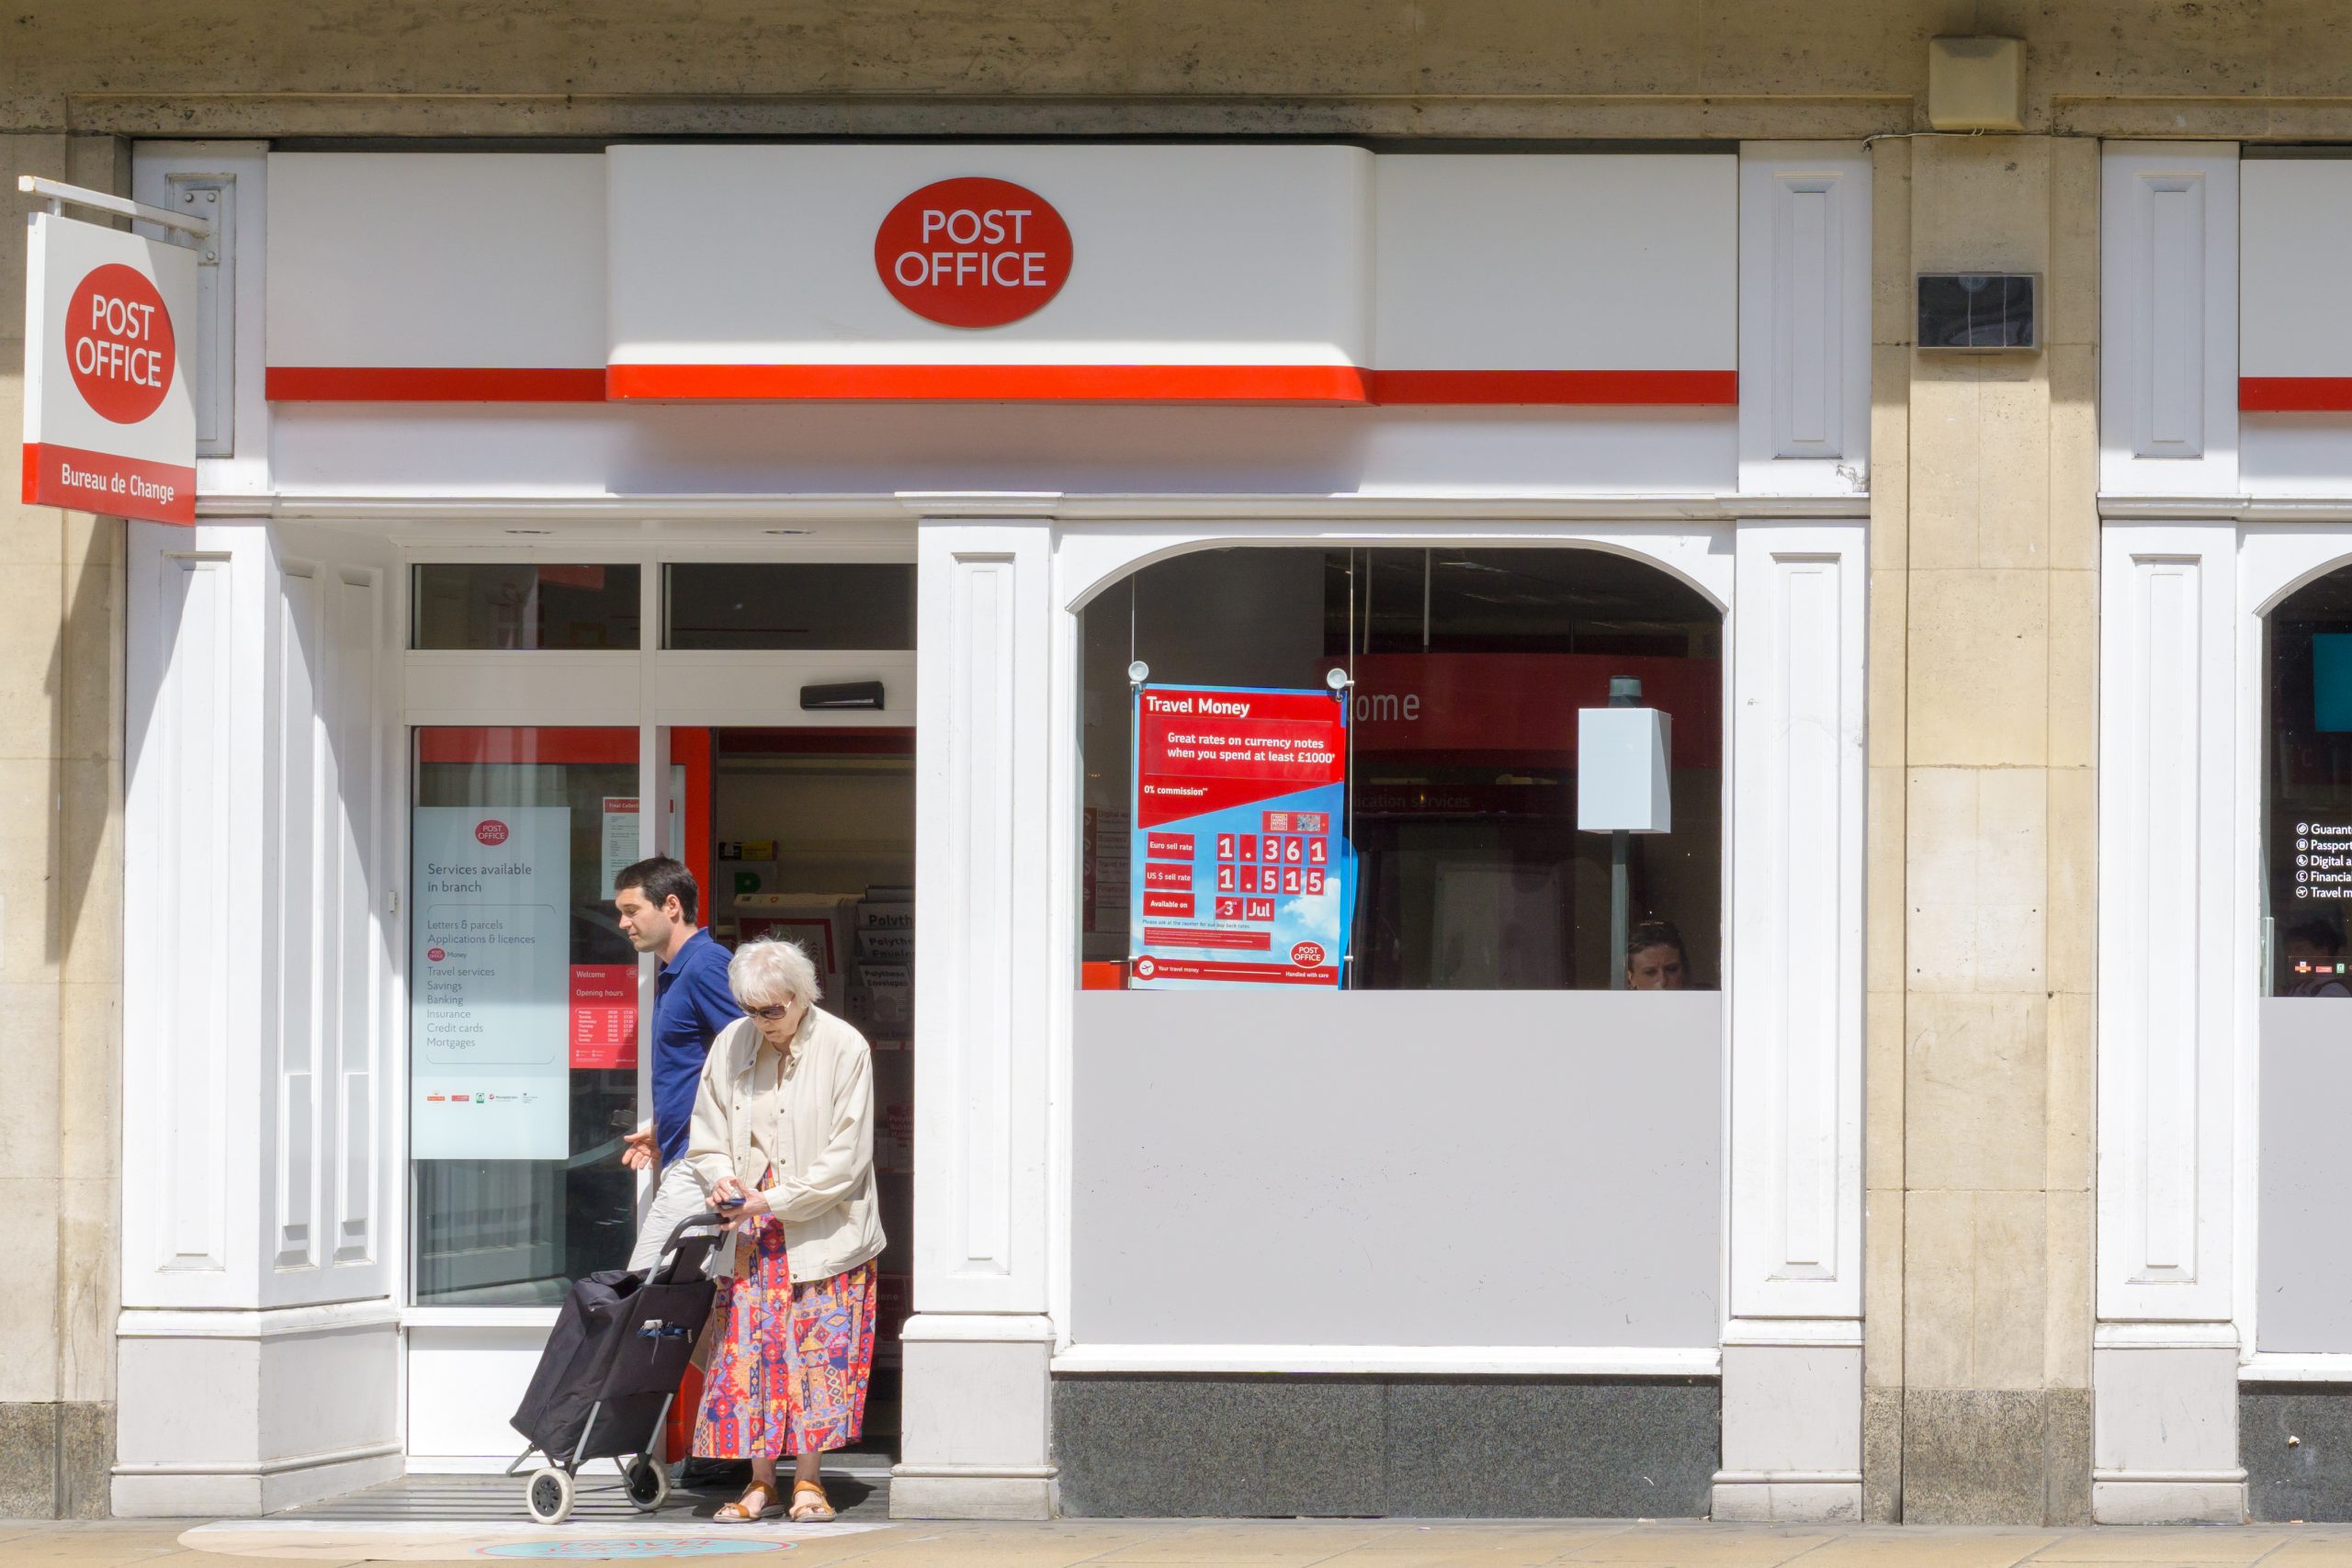 Post Office card accounts for pensions coming to an end